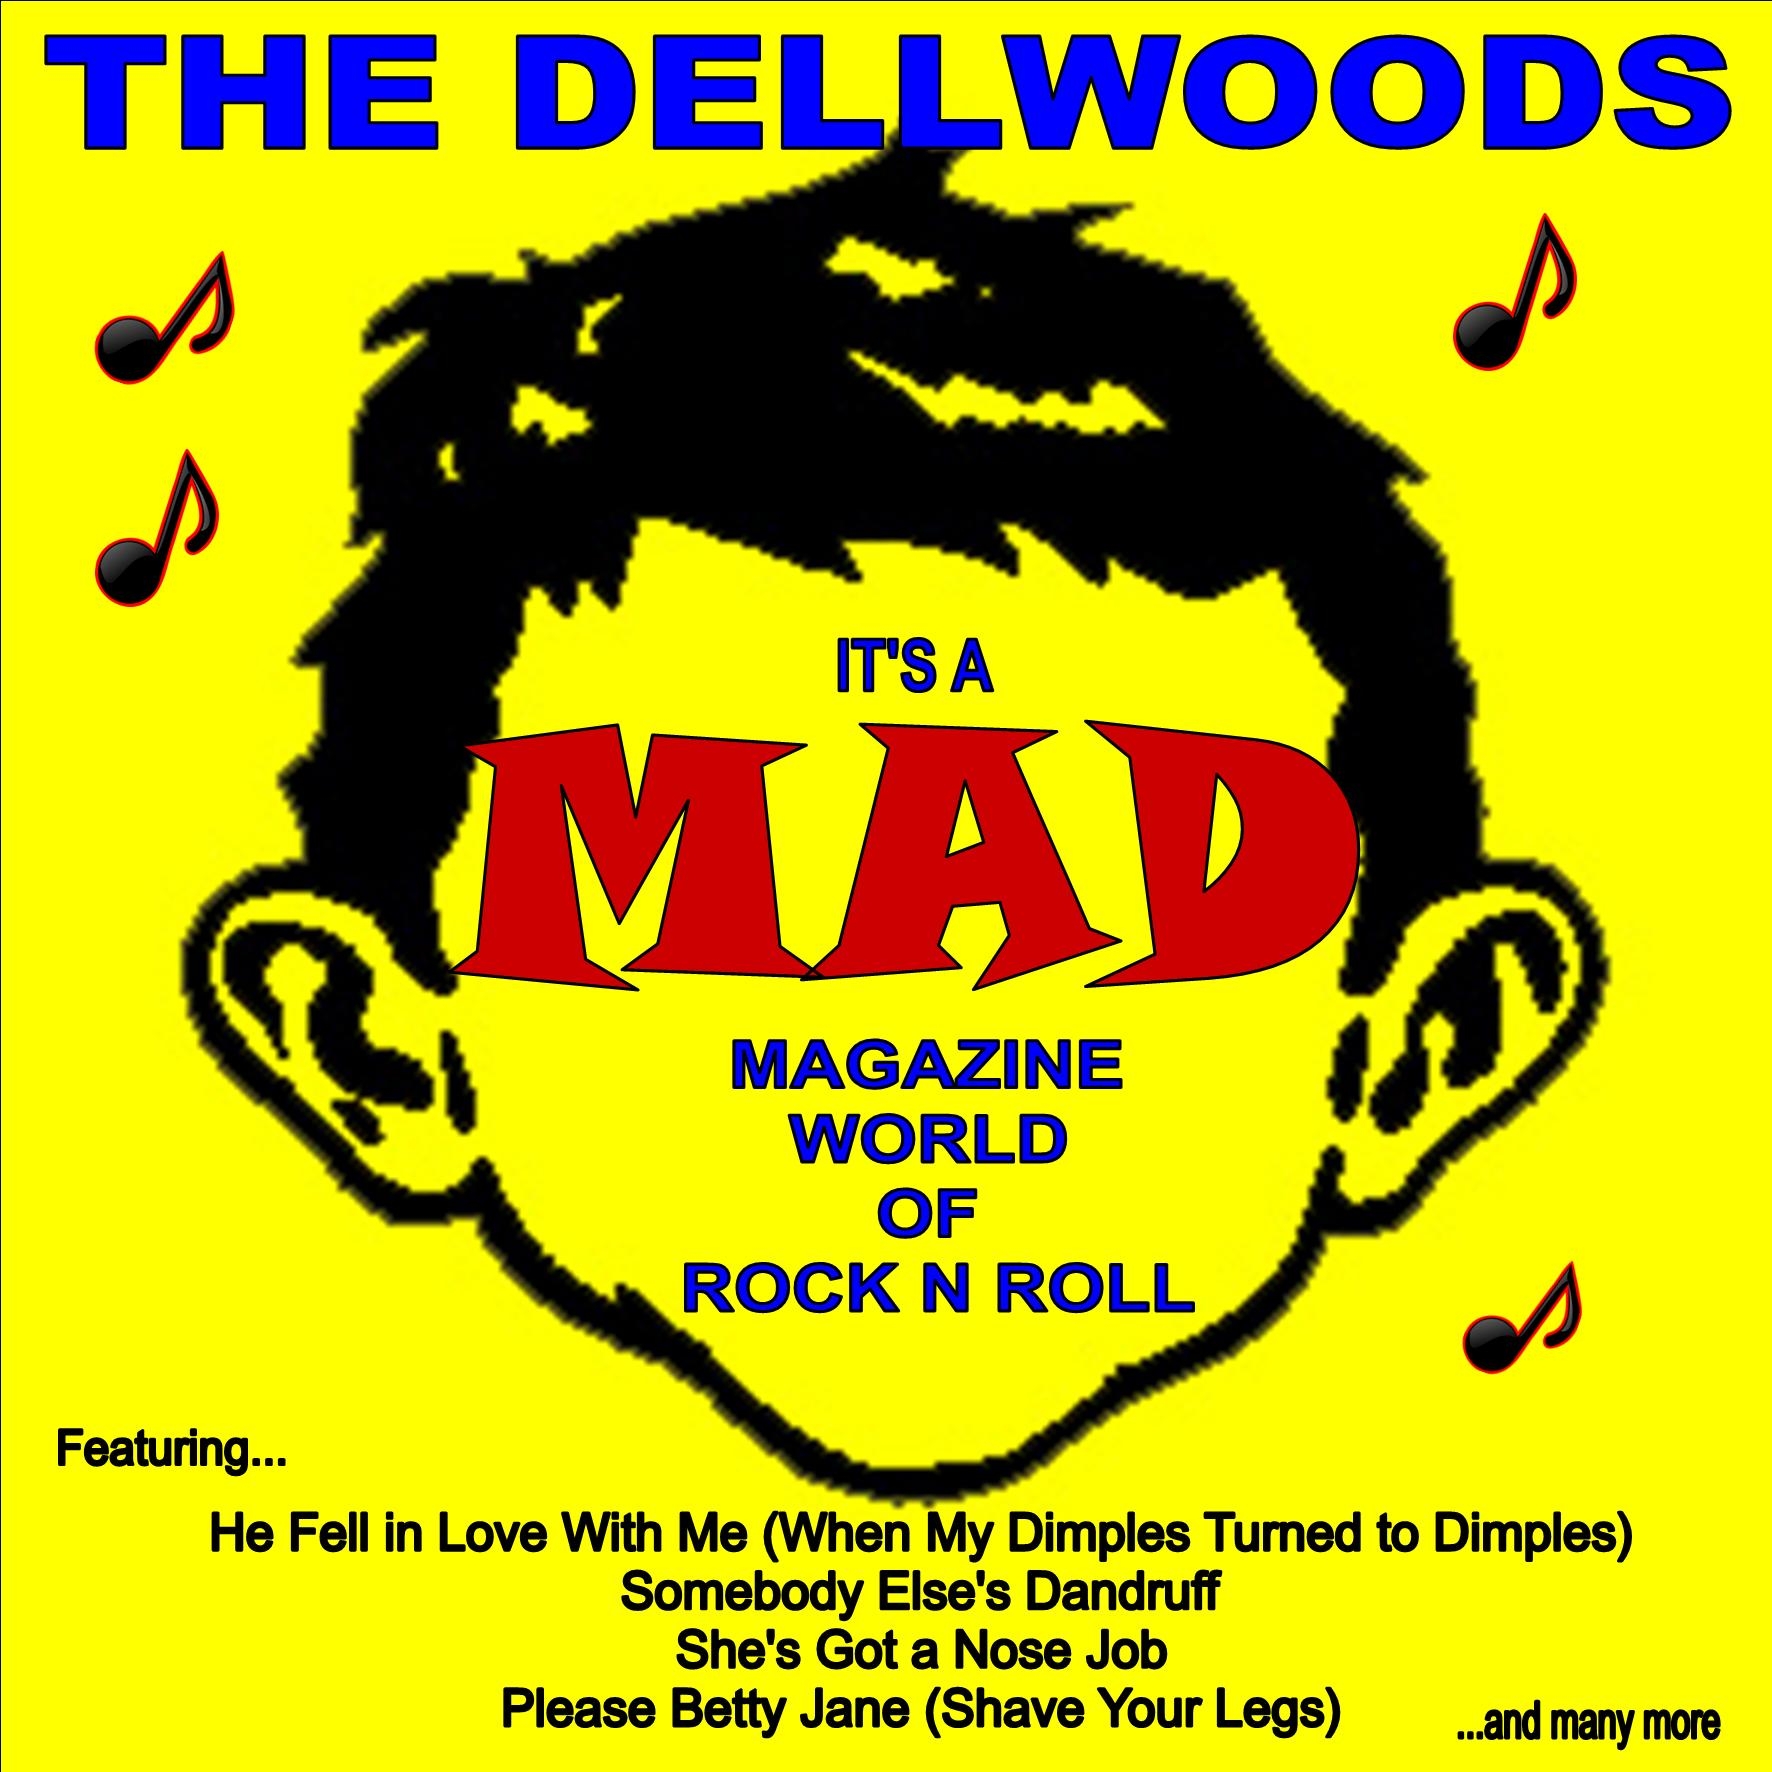 It's a MAD Magazine World of Rock 'n Roll